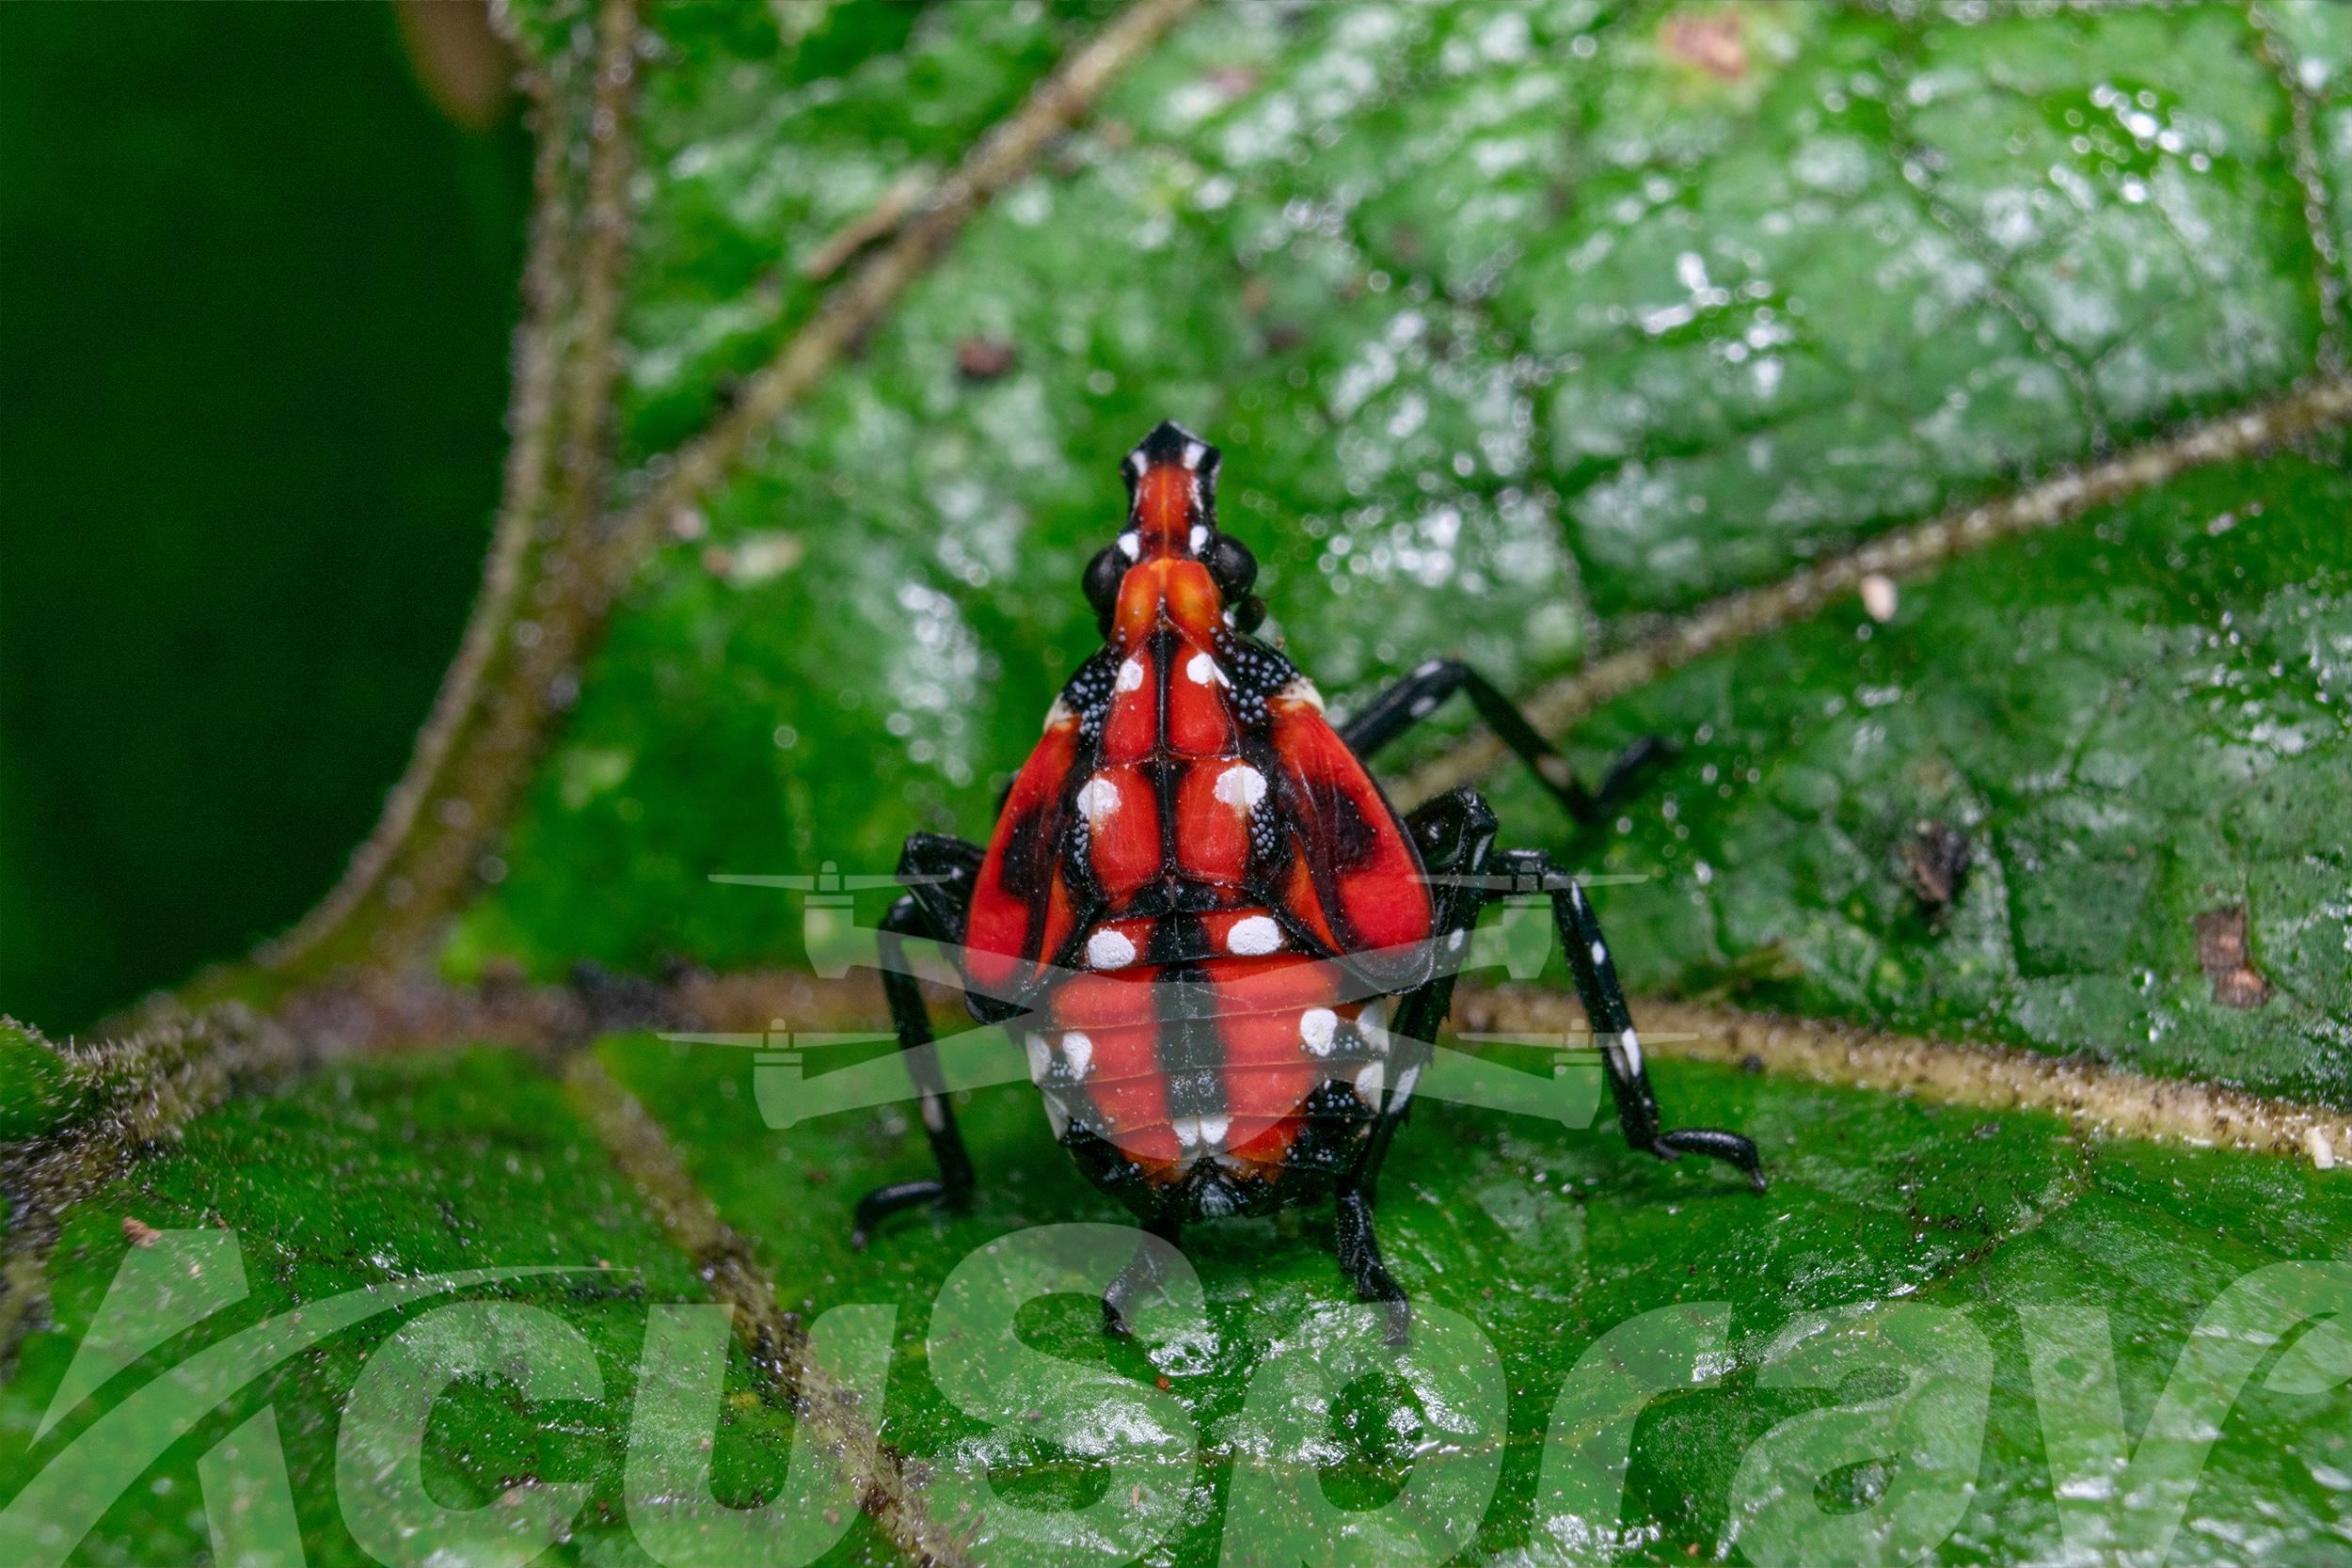 Spotted Lanternfly nymph perched on a green leaf.